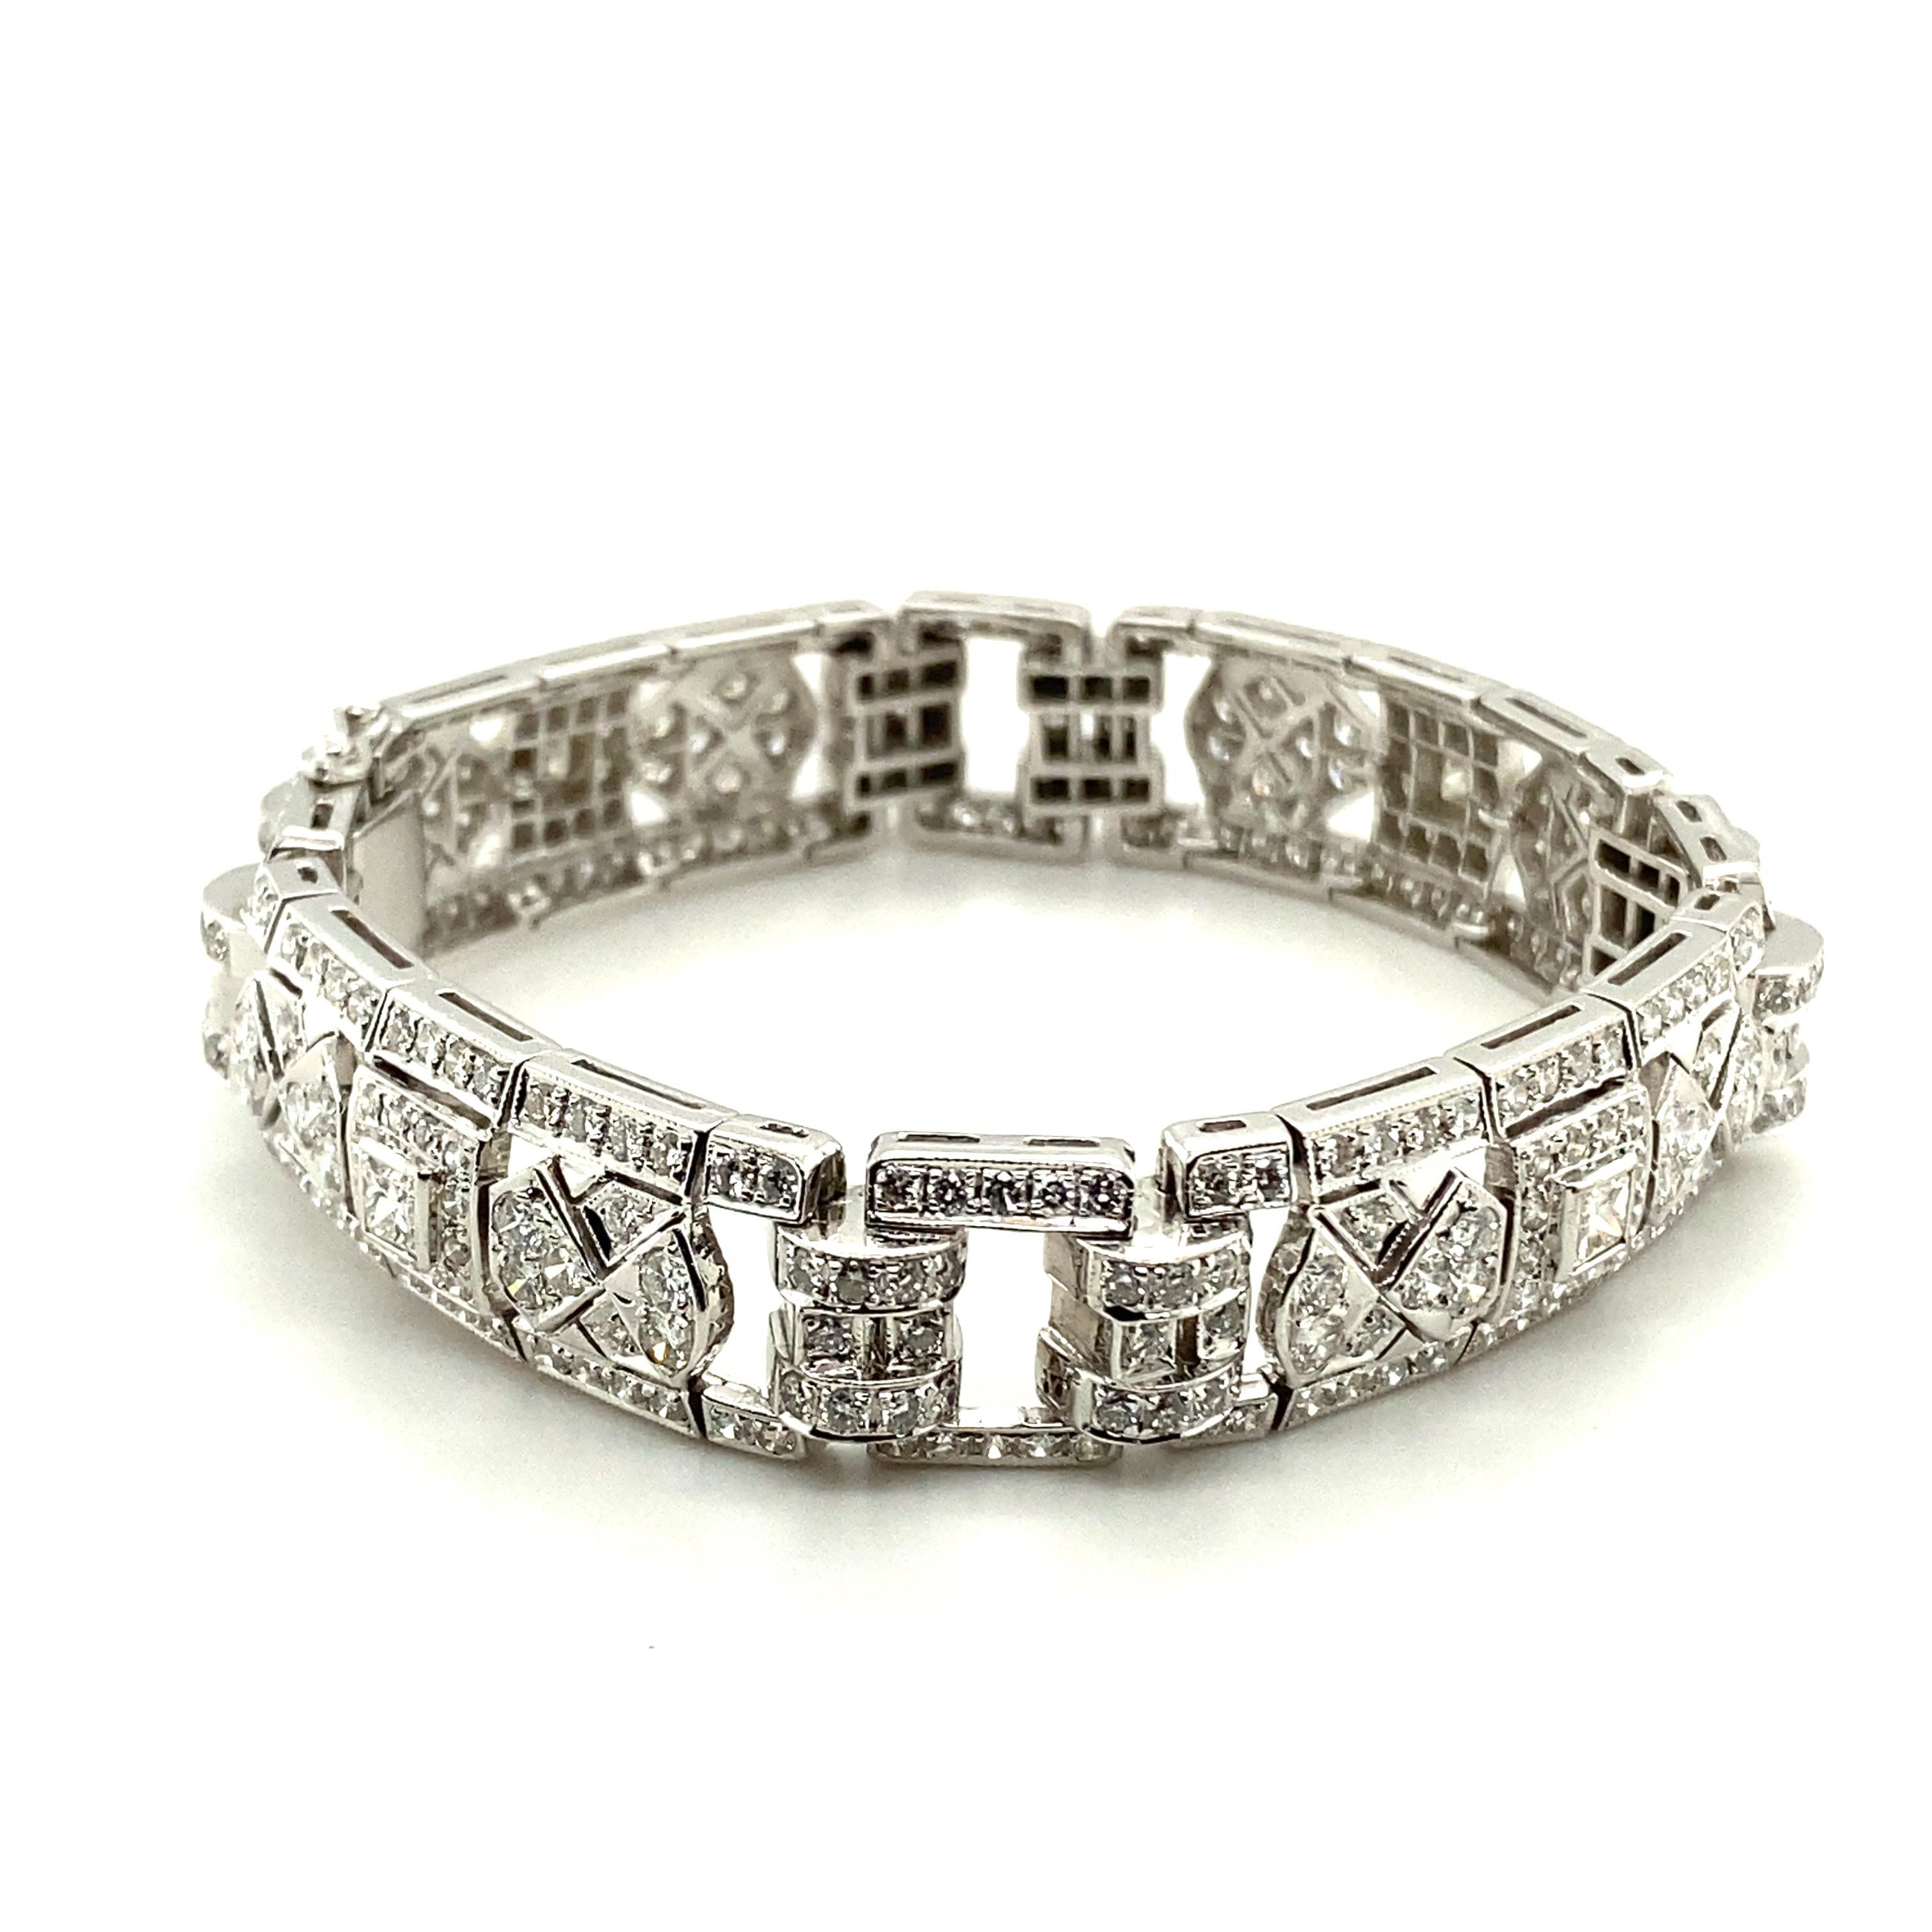 Sparkling Diamond Bracelet in 18K White Gold In Good Condition For Sale In Lucerne, CH